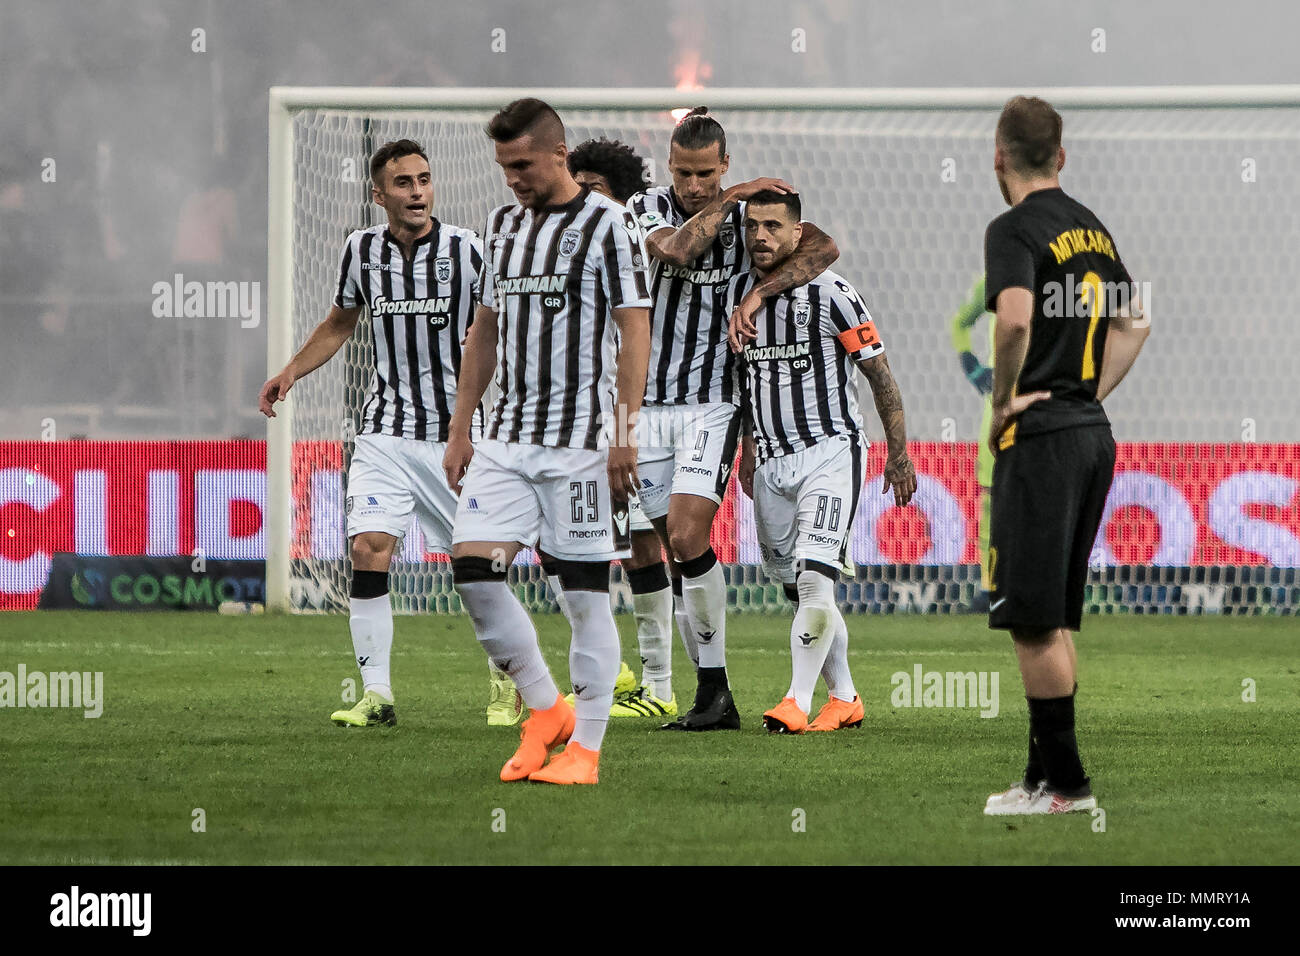 Athens, Greece. 12th May, 2018. PAOK Thessaloniki's players celebrate  during the Greek Cup Final soccer match against AEK Athens at the Olympic  Stadium in Athens, Greece, on May 12, 2018. PAOK Thessaloniki